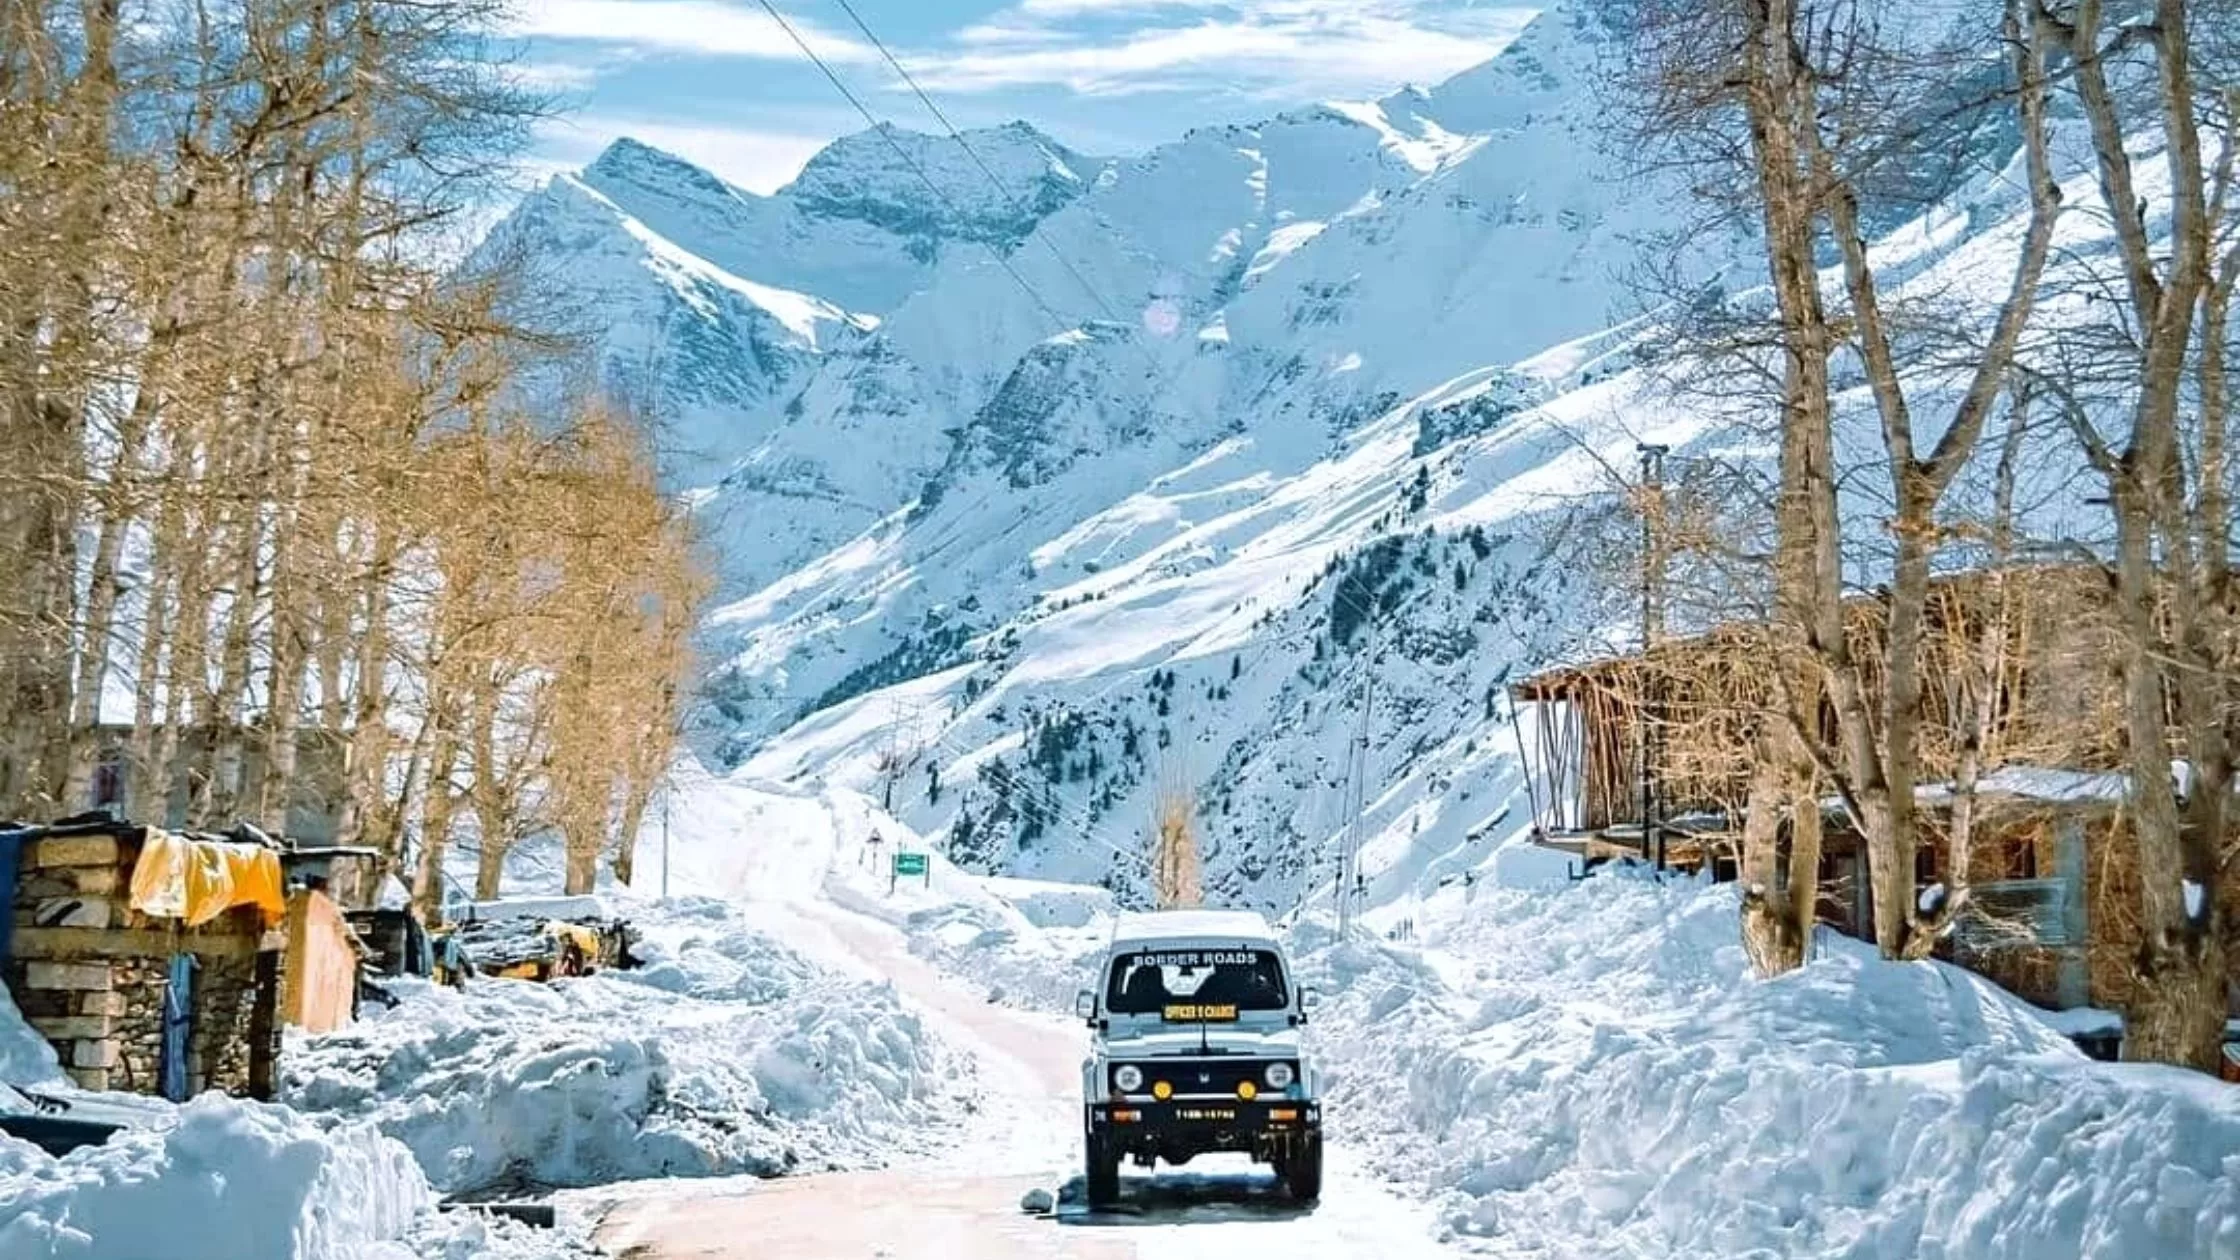 Confused About How to Travel to Spiti in Winter? with this Itinerary in Hand, You’re Ready to Go!